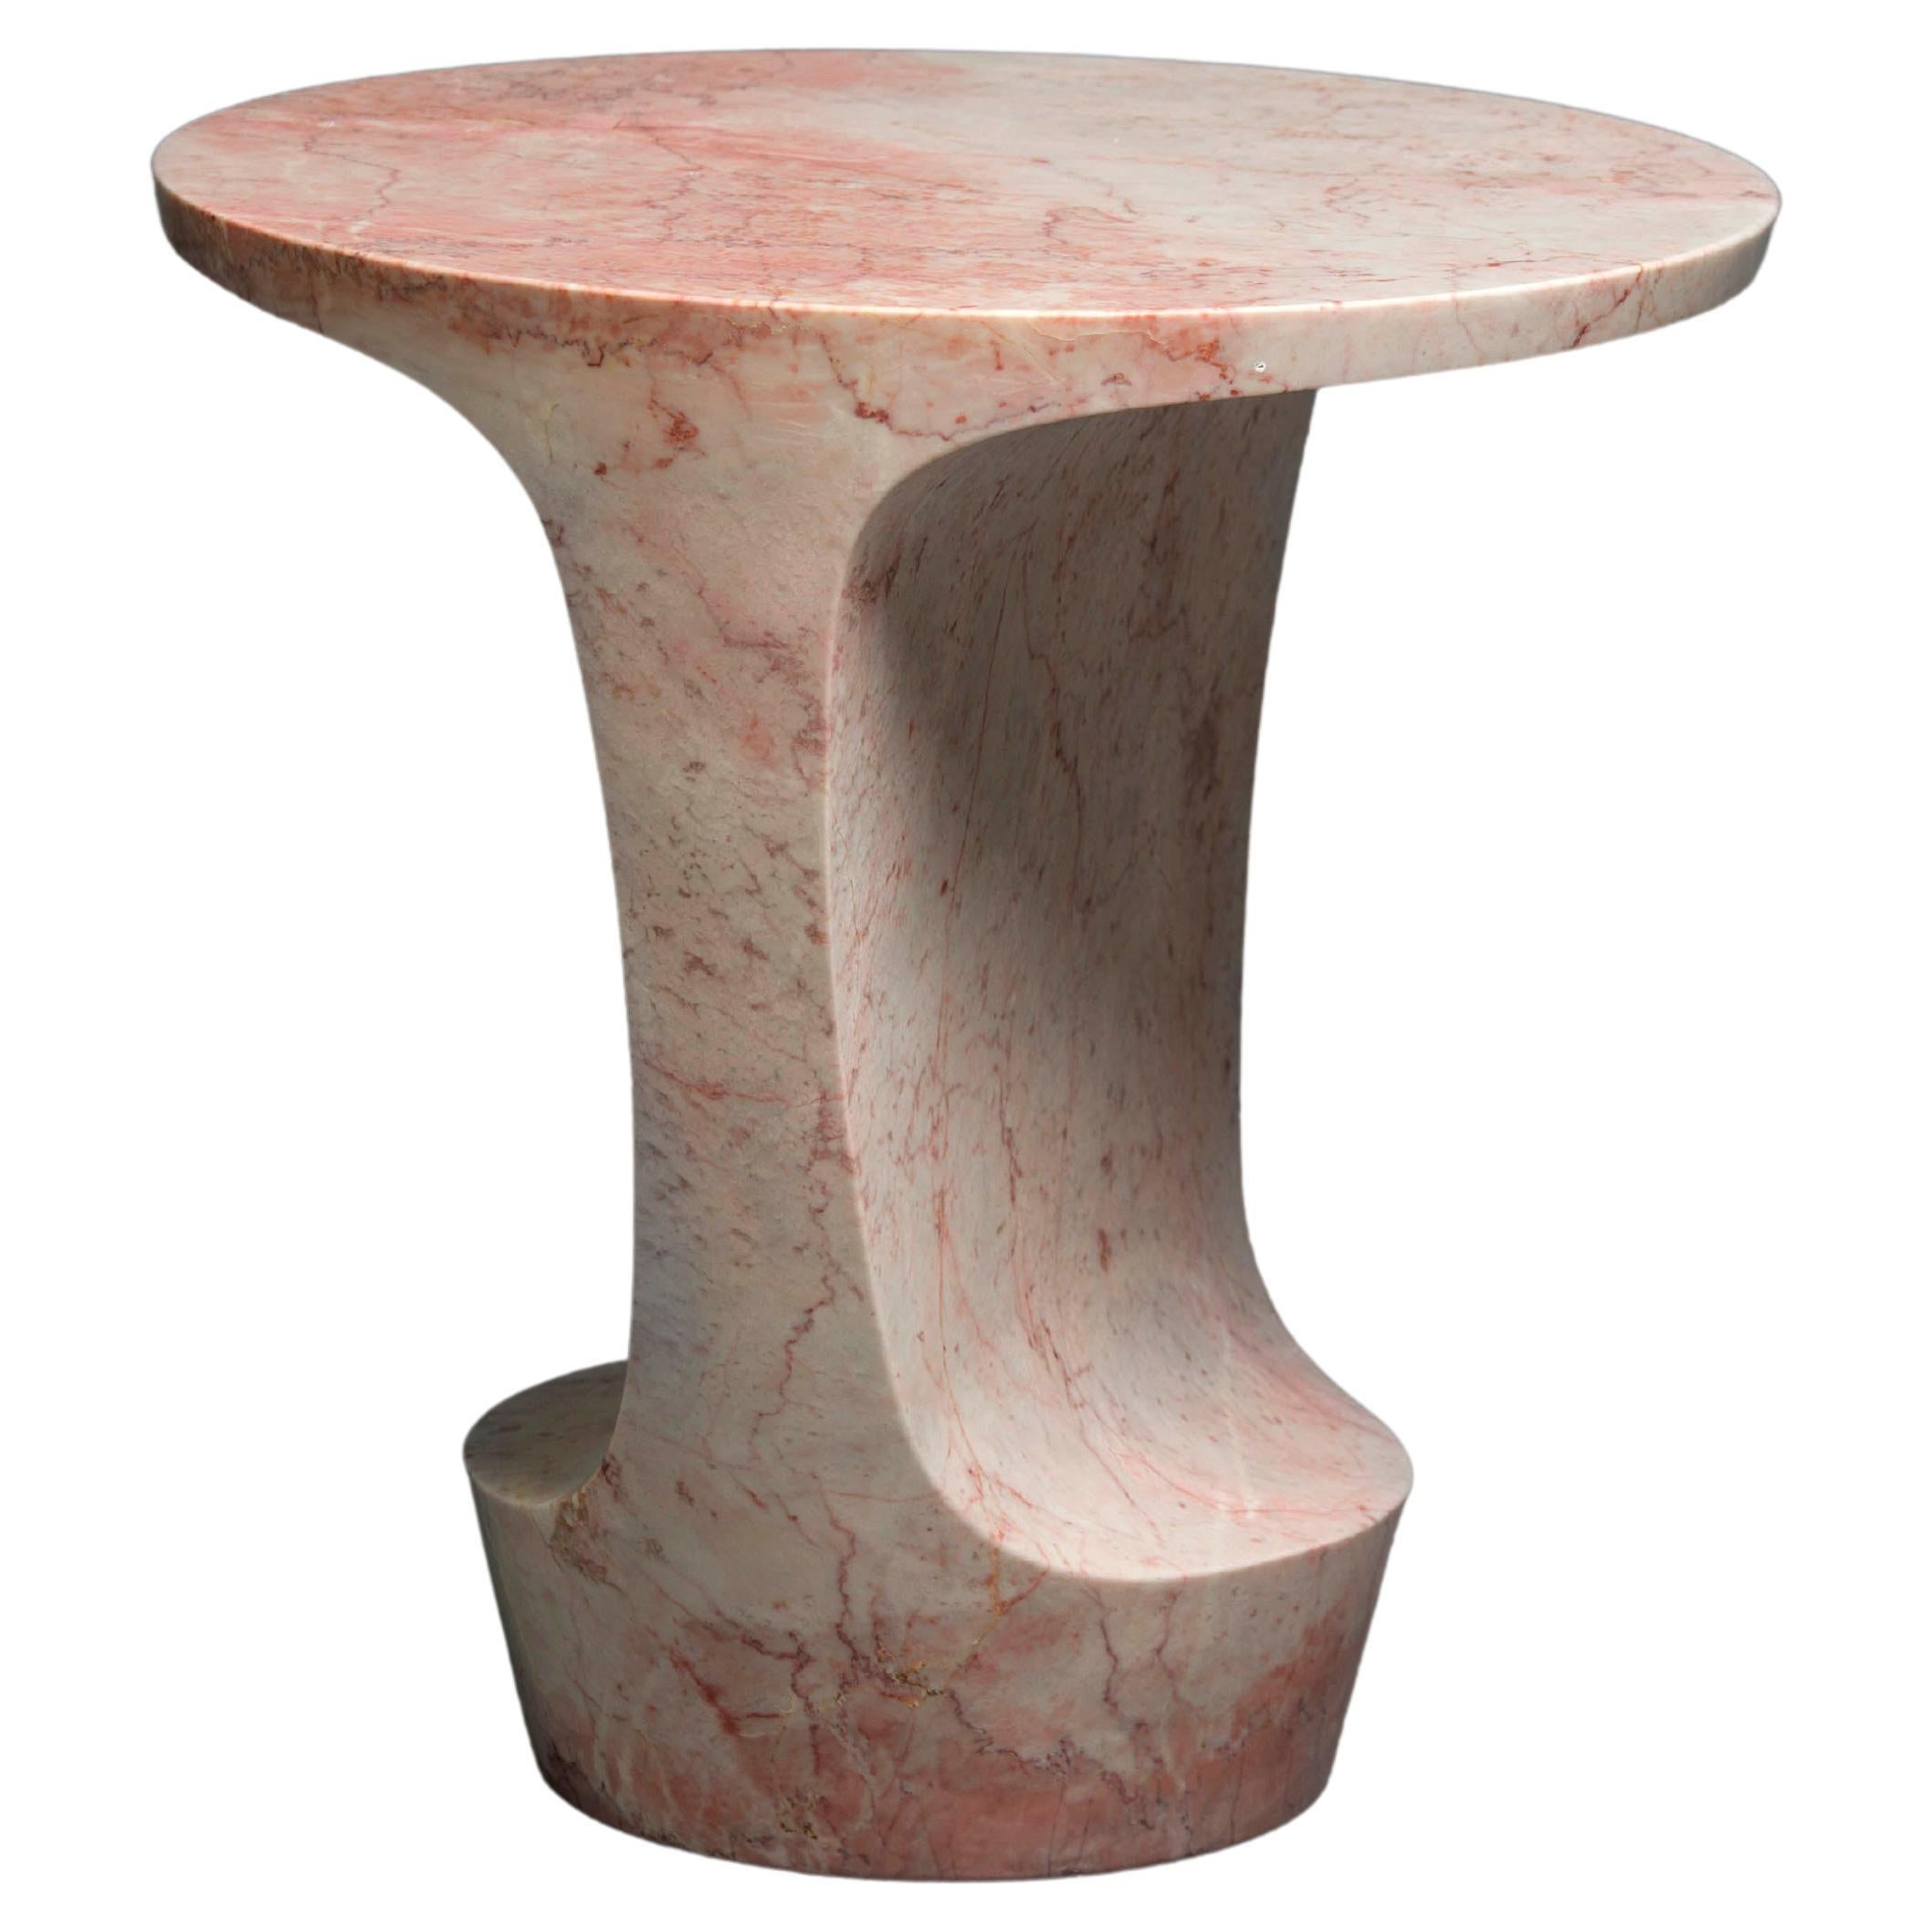 Atlas large Table in Rossata Marble by Adolfo Abejon for Formar